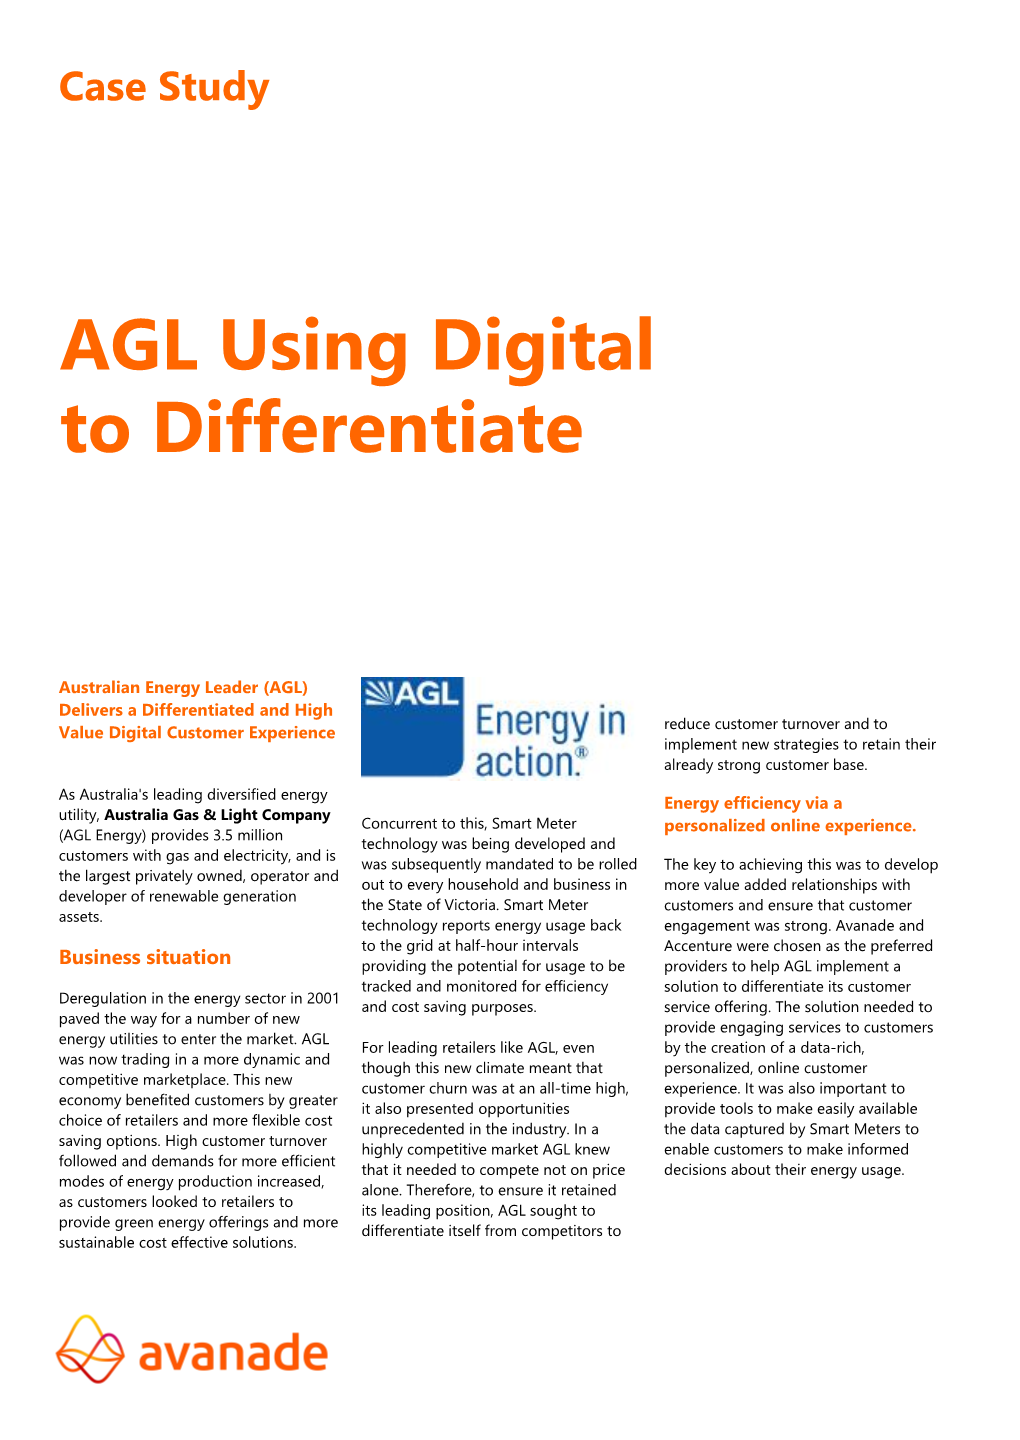 AGL Using Digital to Differentiate